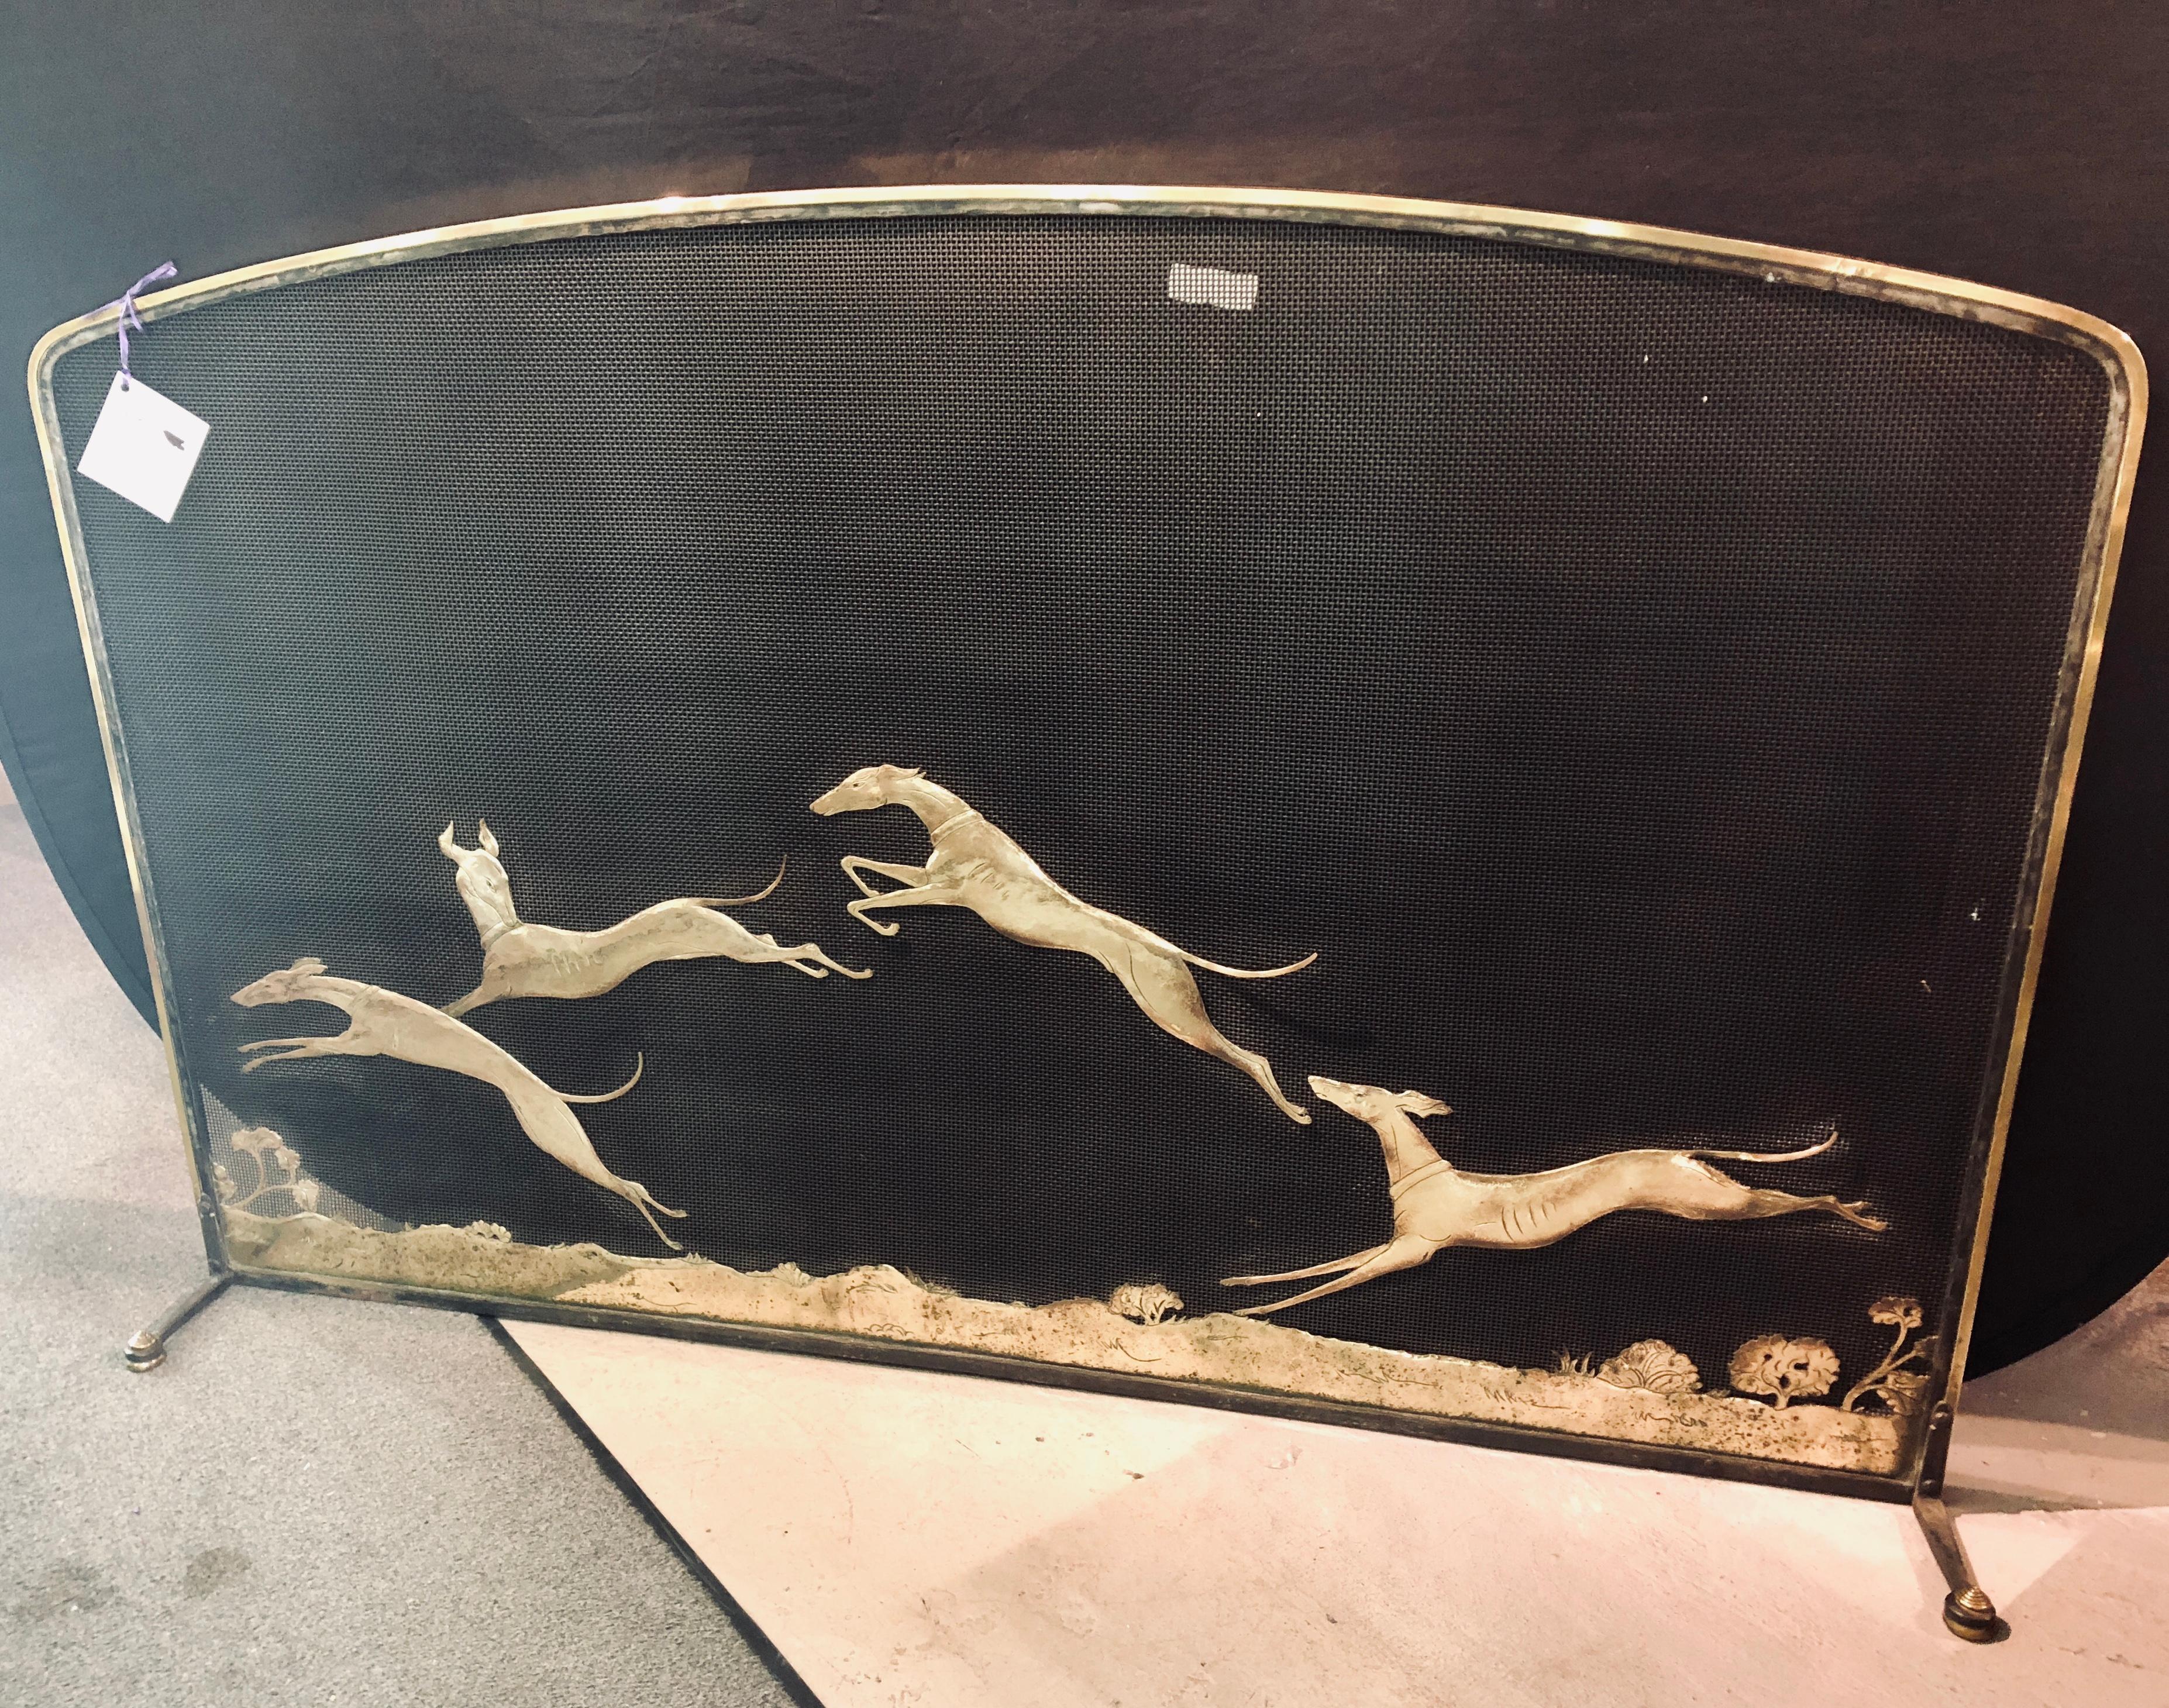 Vintage Bronze Monumental Firescreen signed by Oscar Bach of a group of Running Hounds. This one of a kind firescreen is not only artist signed but is also Pat Pending. The over sized bronze screen depicts four steeplechase hounds jumping over the